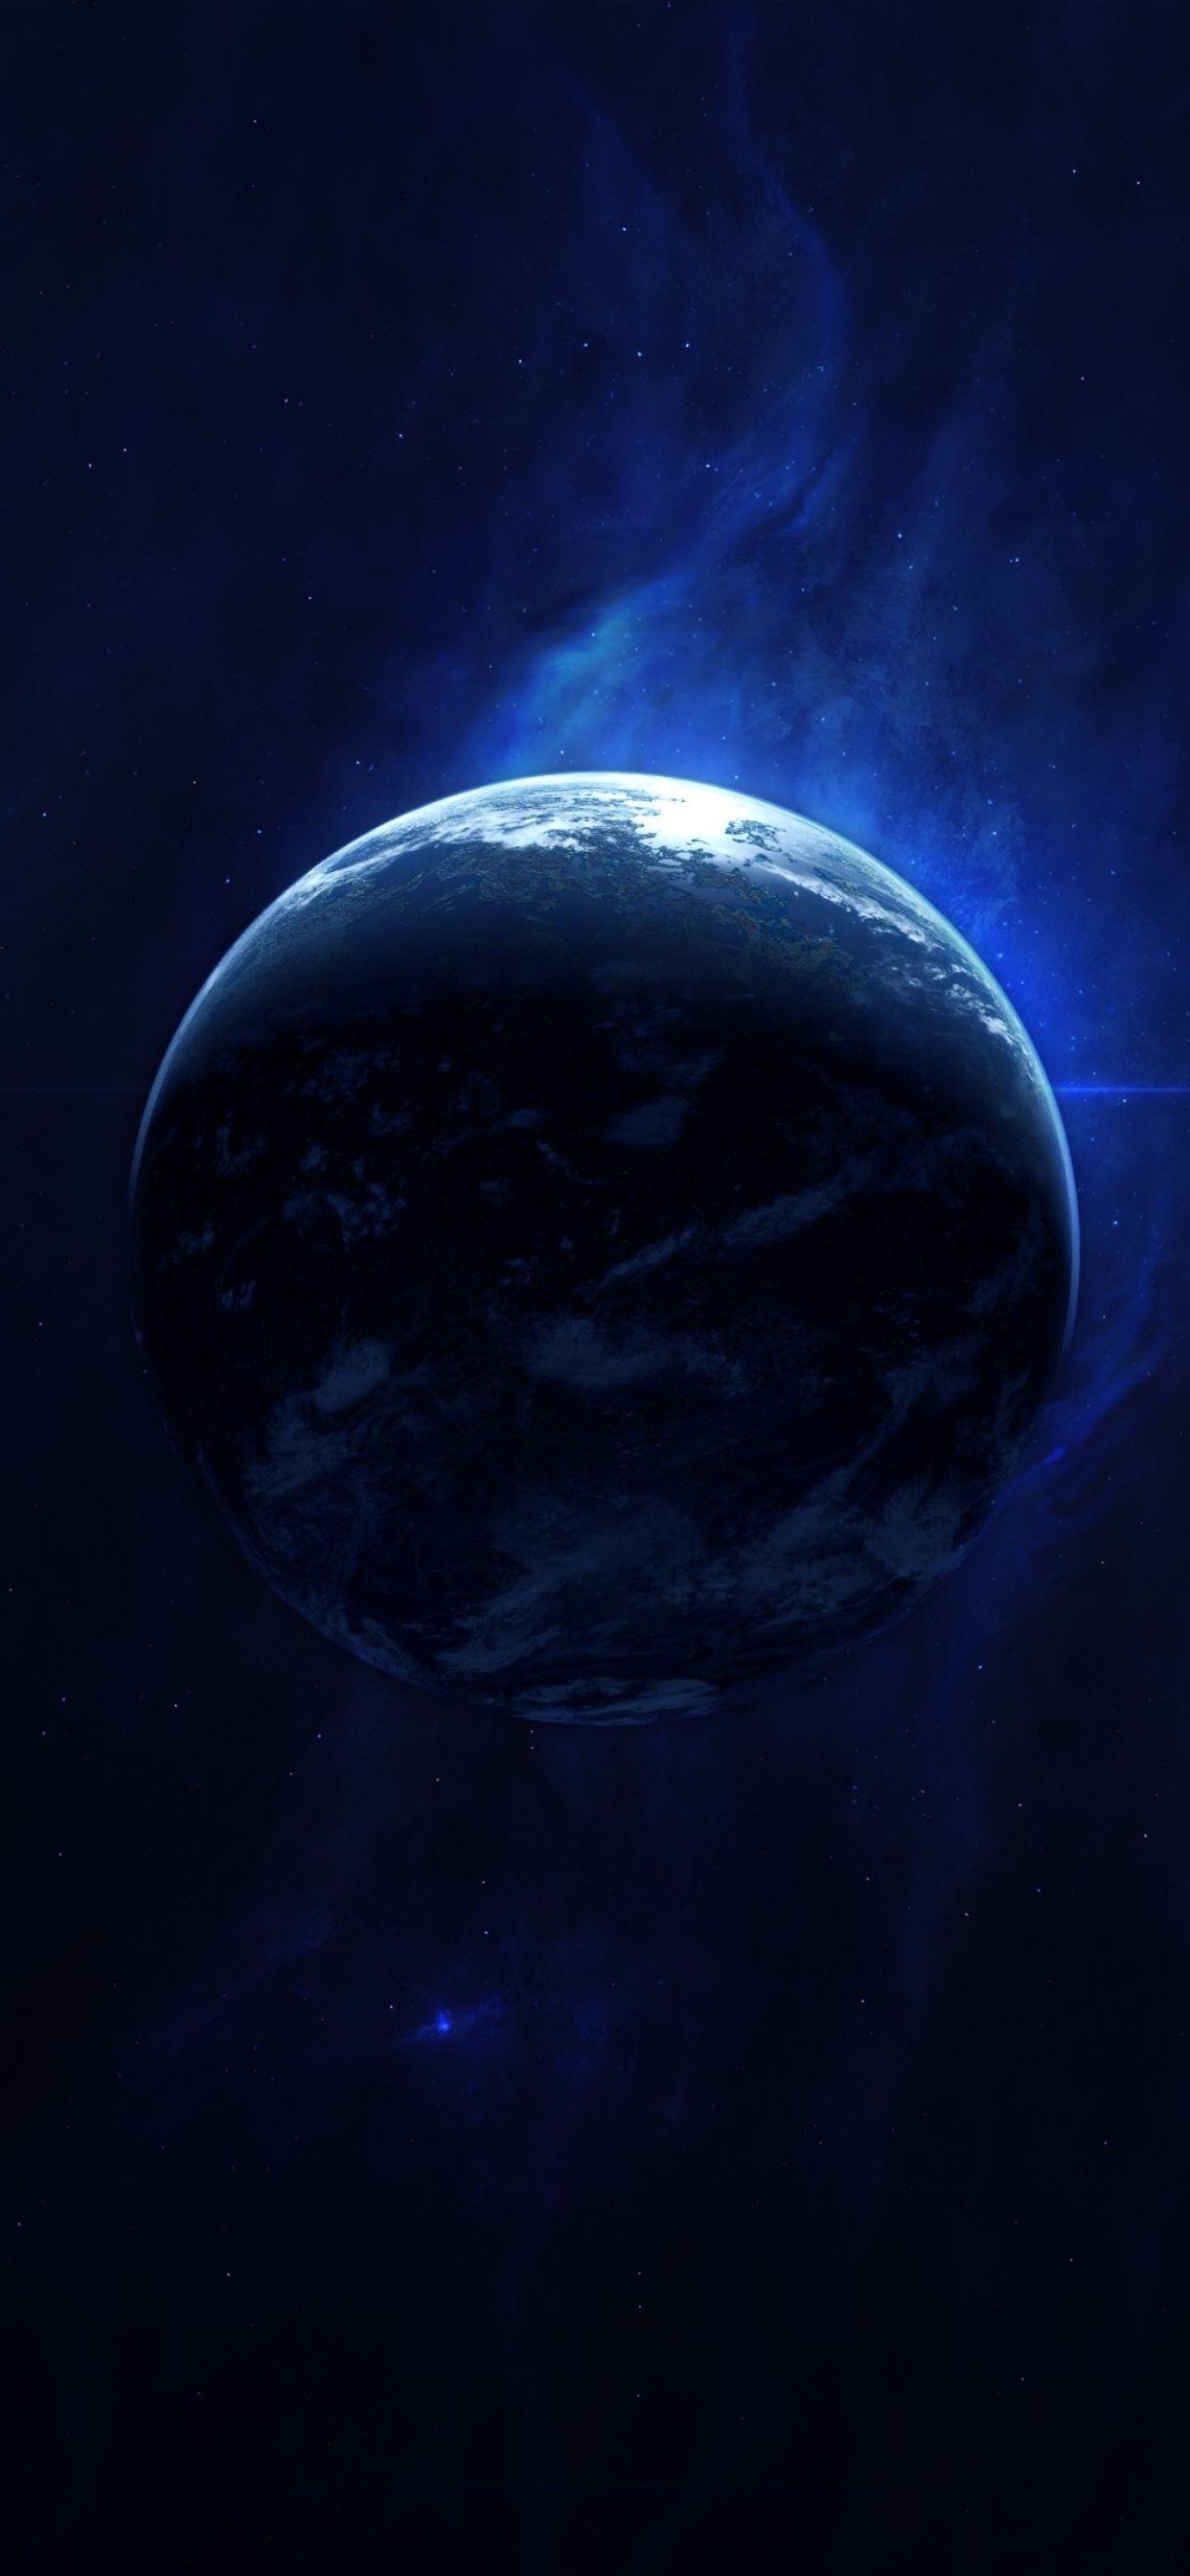 Planet In Space 4K iPhone XS MAX Wallpaper, HD Space 4K Wallpaper